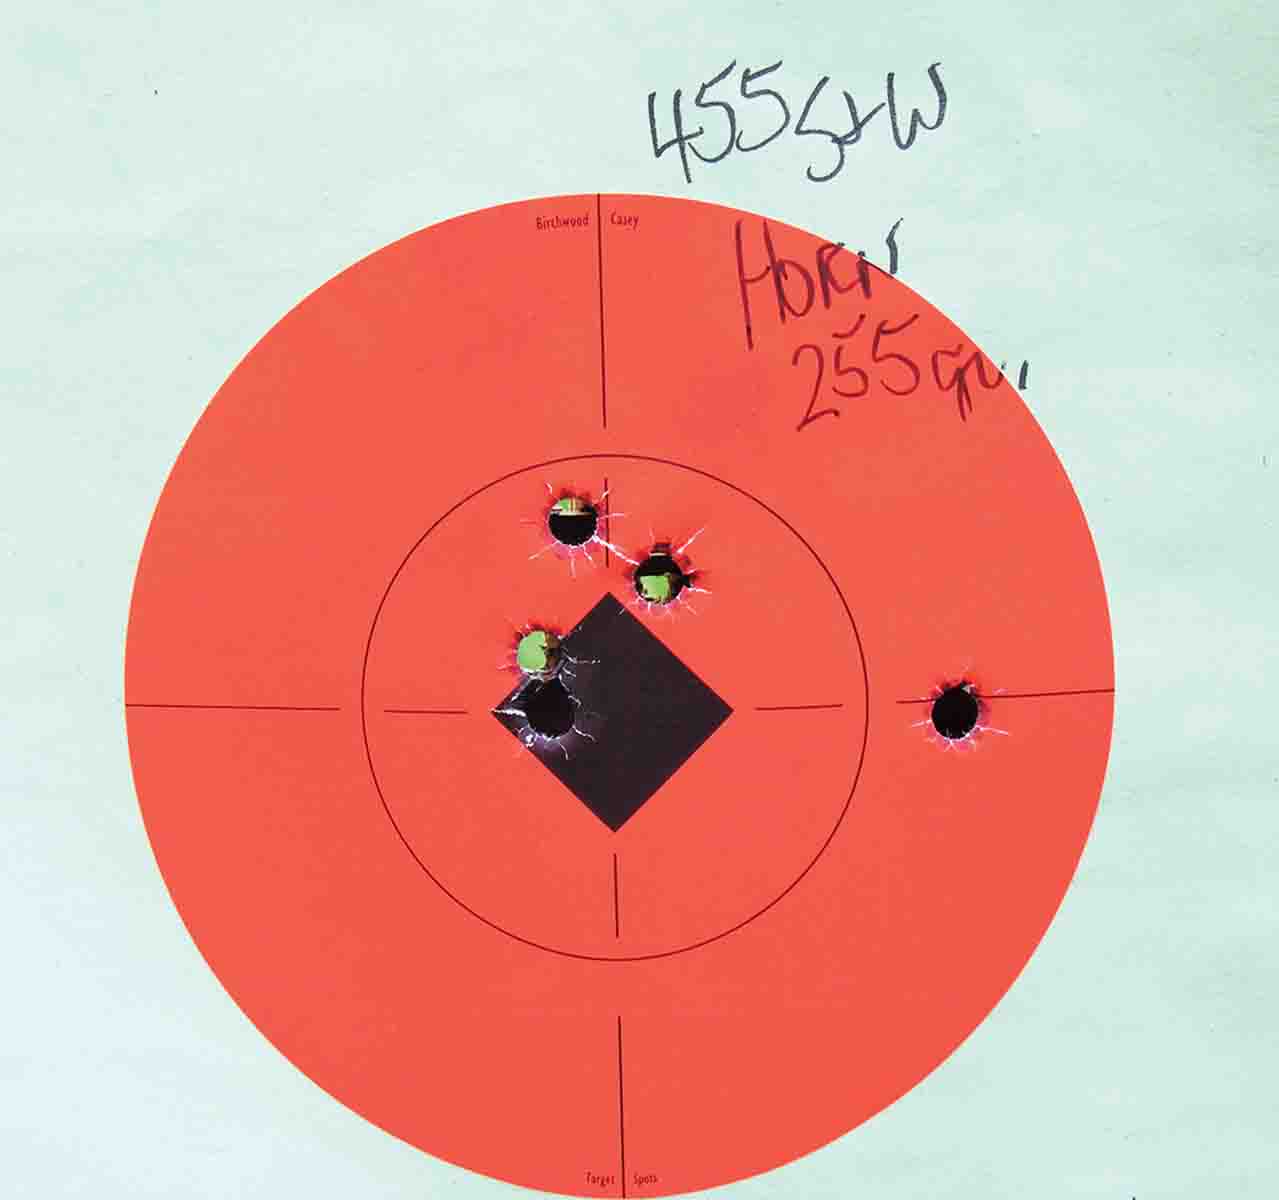 Mike’s .455 S&W Second Model Hand Ejector shoots to point of aim. This group was fired one-handed at 50 feet. Shot number five at right was called a flyer.